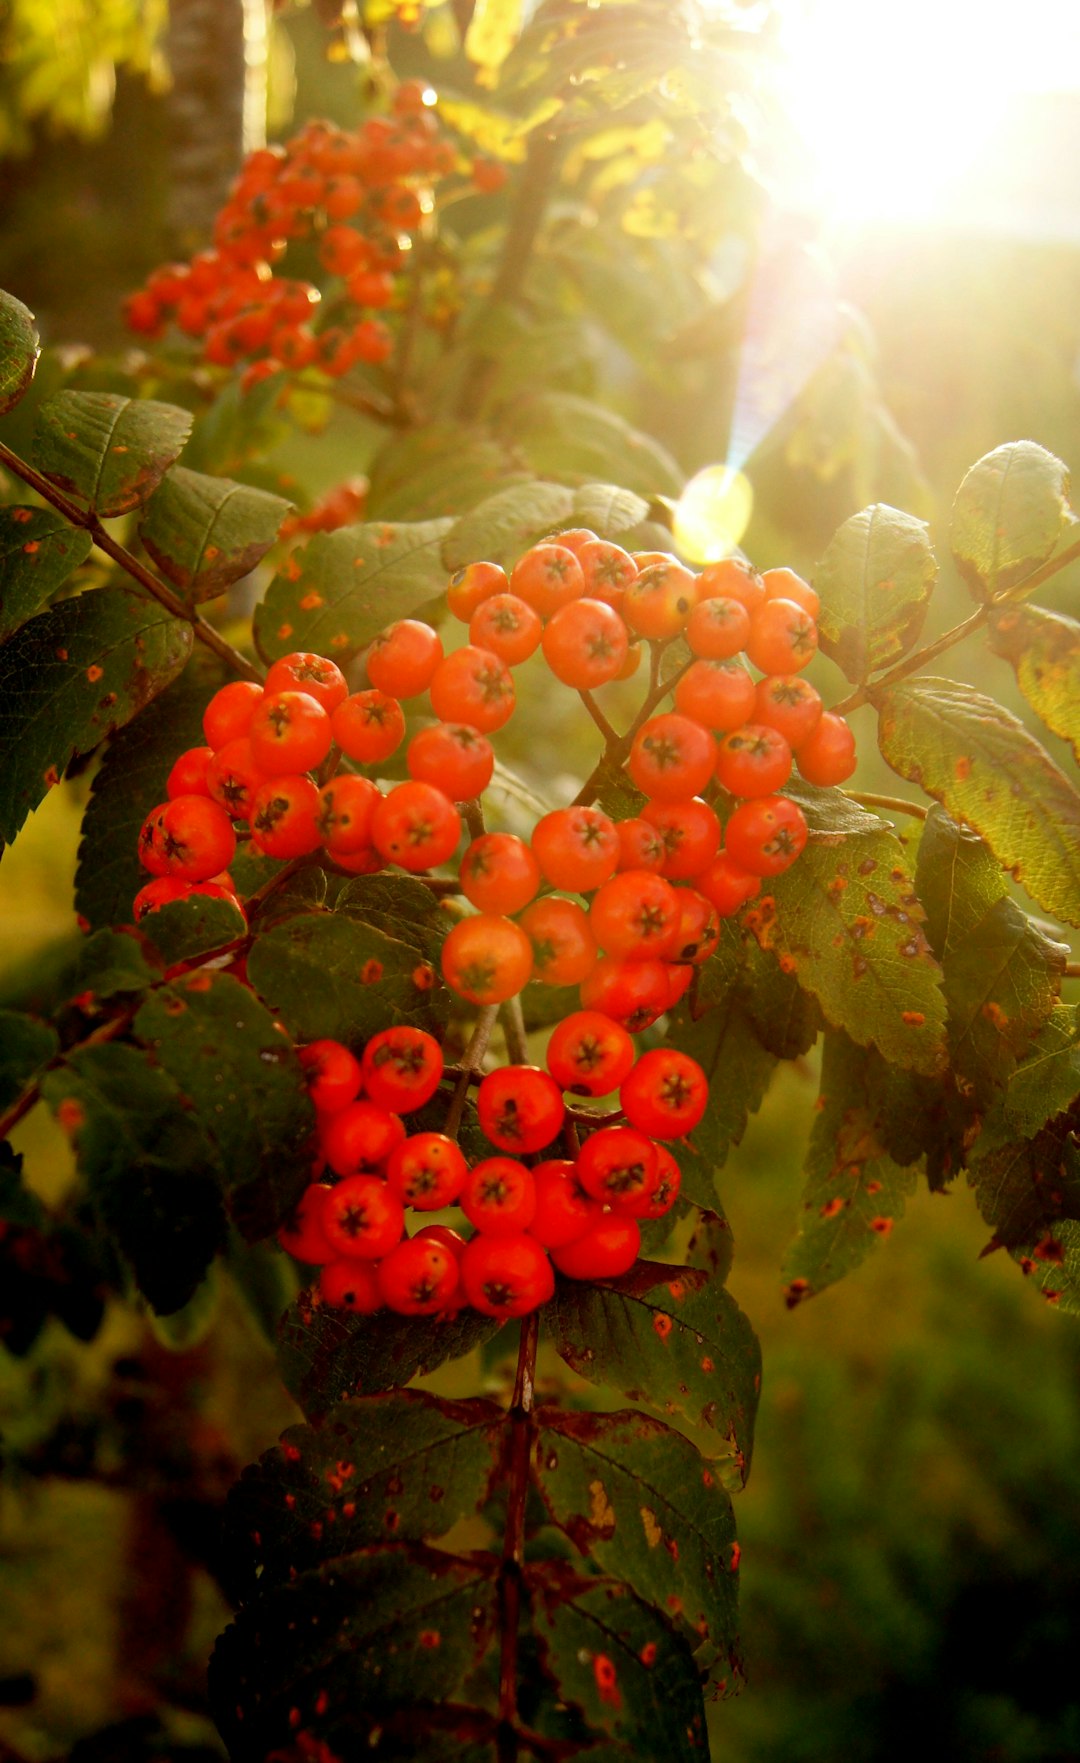 holy berry, holy berry, a bush with bright red berries on it